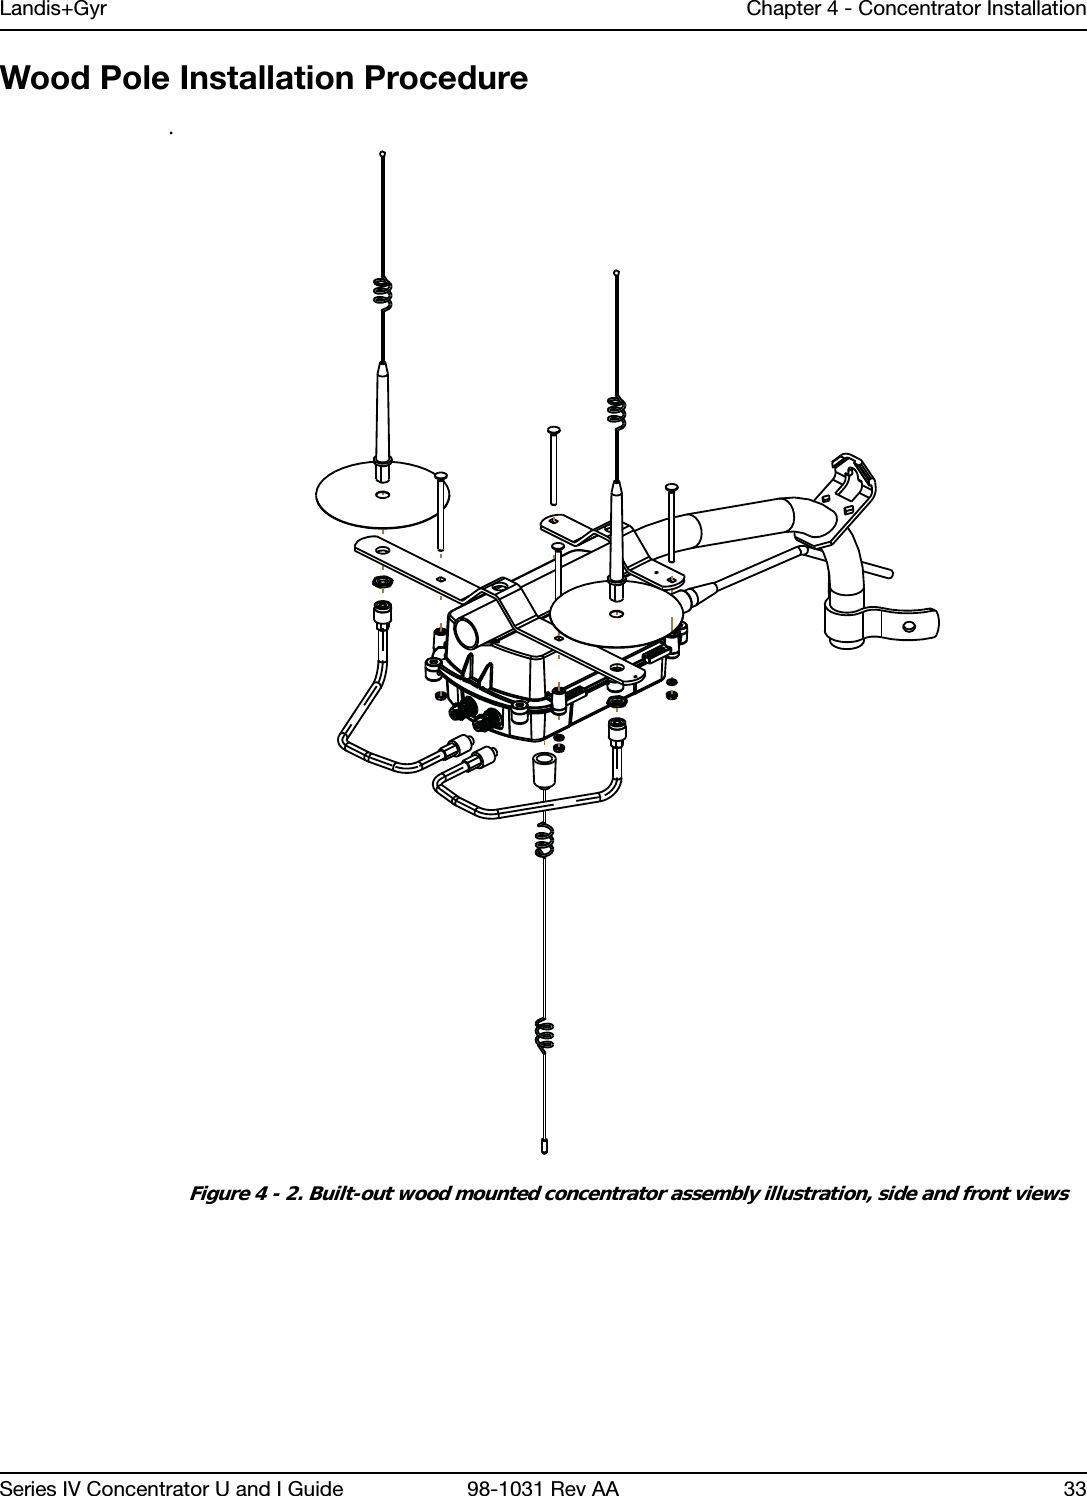 Landis+Gyr Chapter 4 - Concentrator InstallationSeries IV Concentrator U and I Guide 98-1031 Rev AA 33Wood Pole Installation Procedure.Figure 4 - 2. Built-out wood mounted concentrator assembly illustration, side and front views